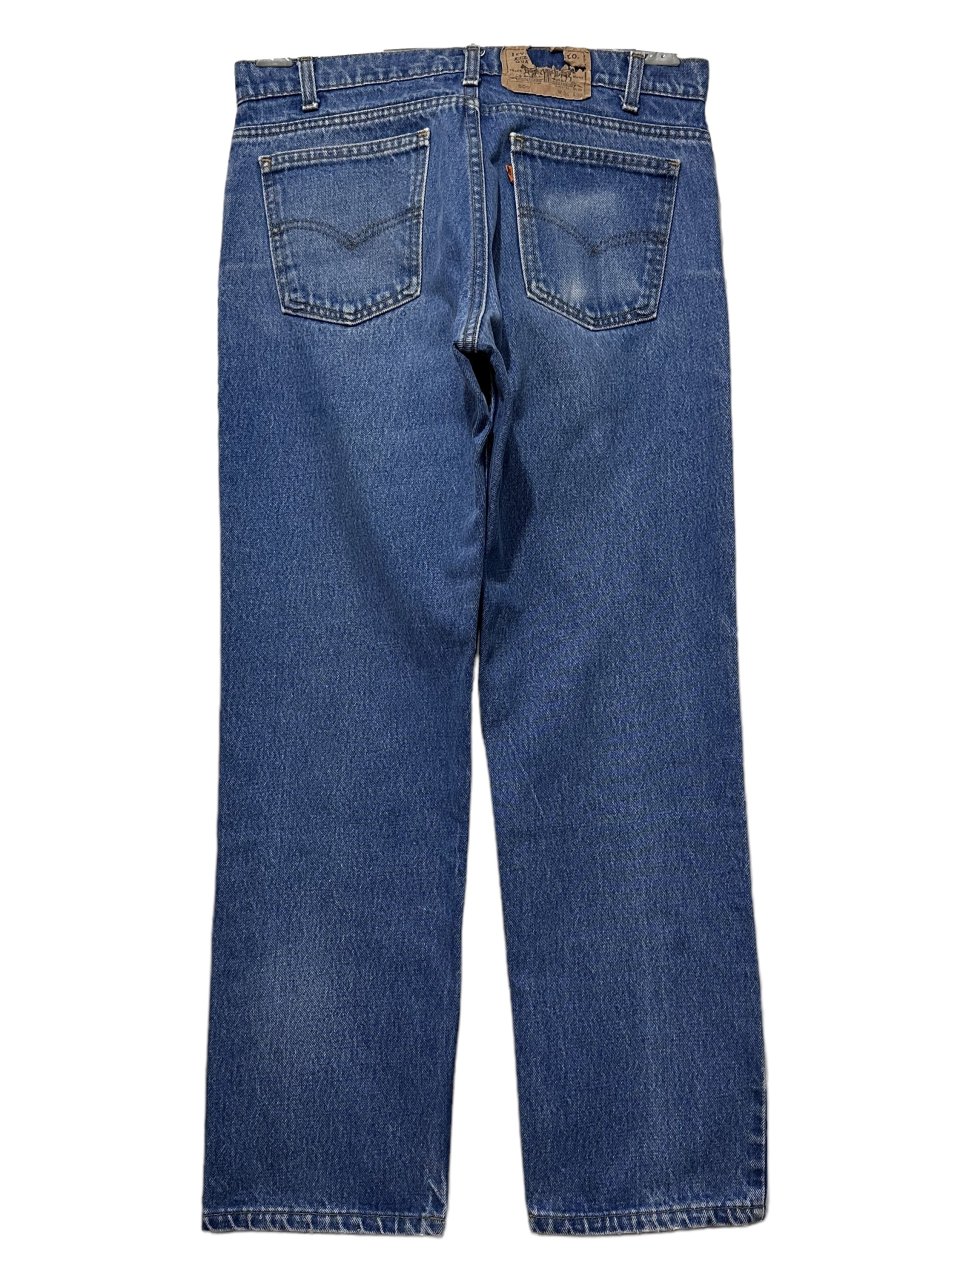 levis リーバイス 505 オレンジタブ made in usa アメリカ製990